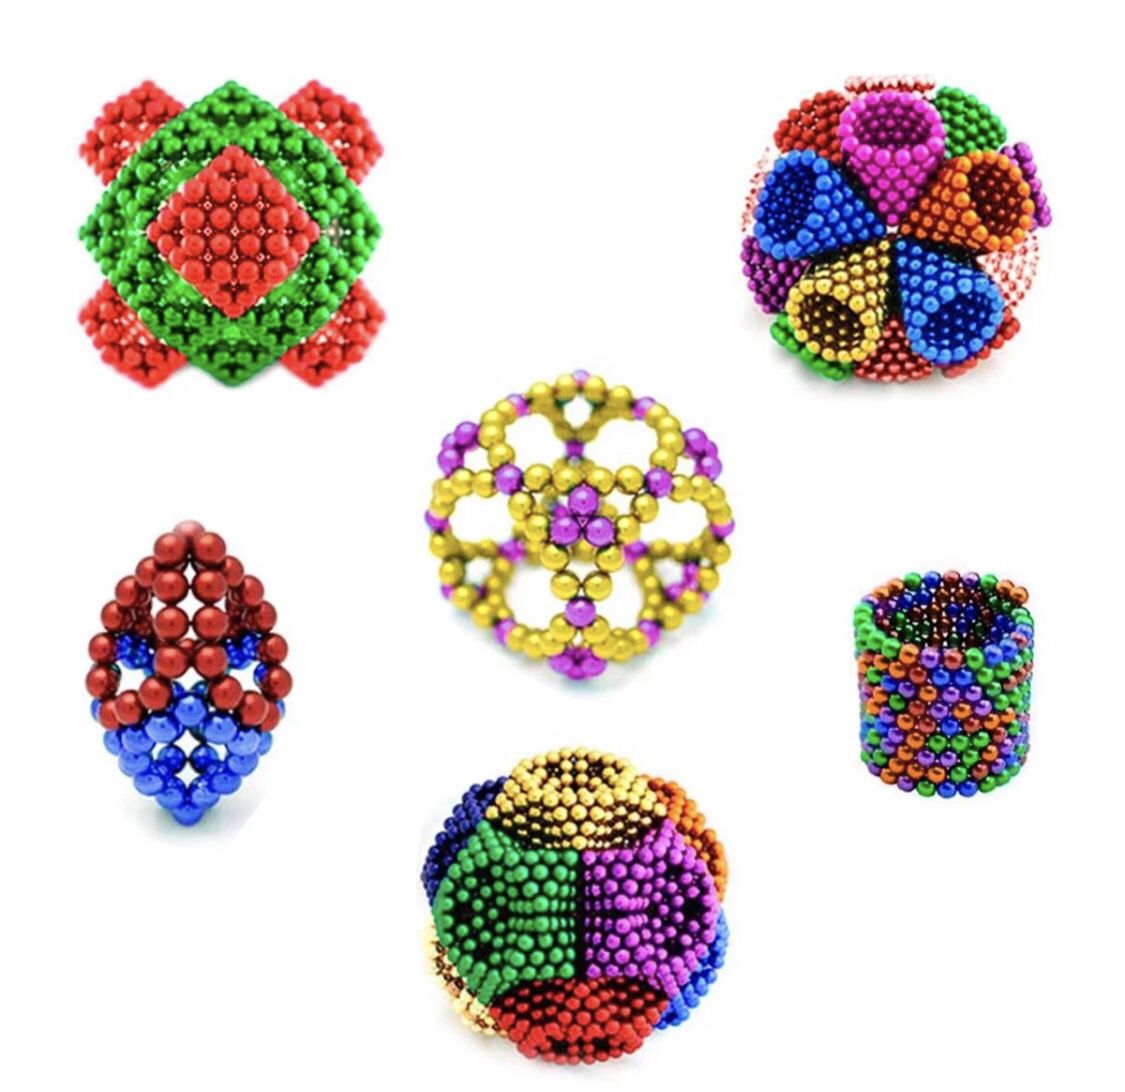 2 Sets Of Magnetic Balls 546 Each. Each Set includes Instructions, Splitter Card, Metal Base, Pouch for storage, Wooden Box